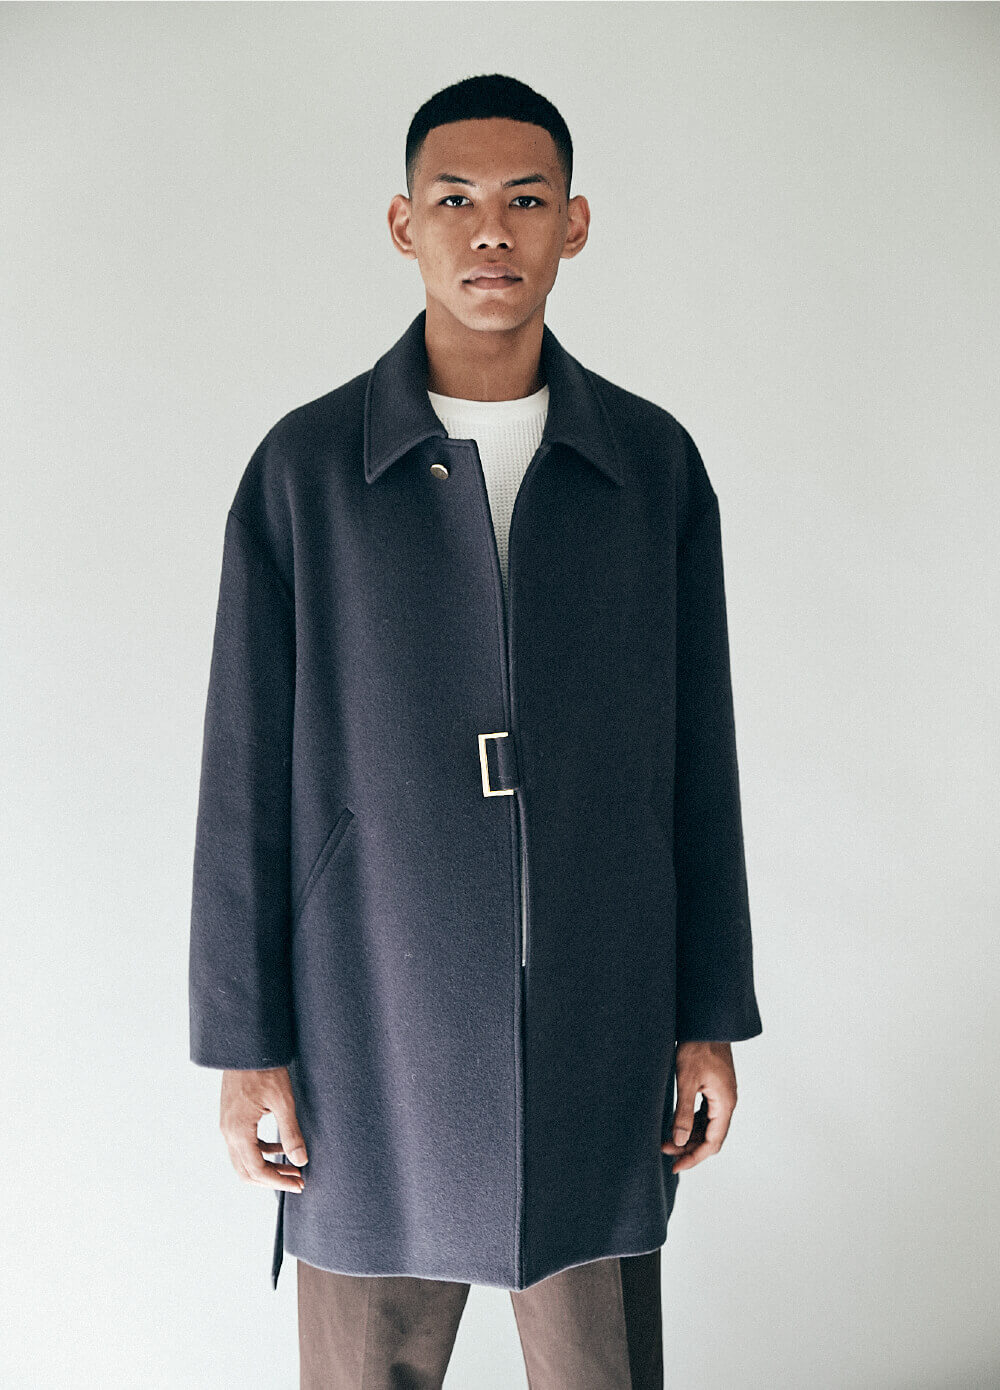 OUTERWEAR SELECTION II｜ STUDIOUS ONLINE公式通販サイト